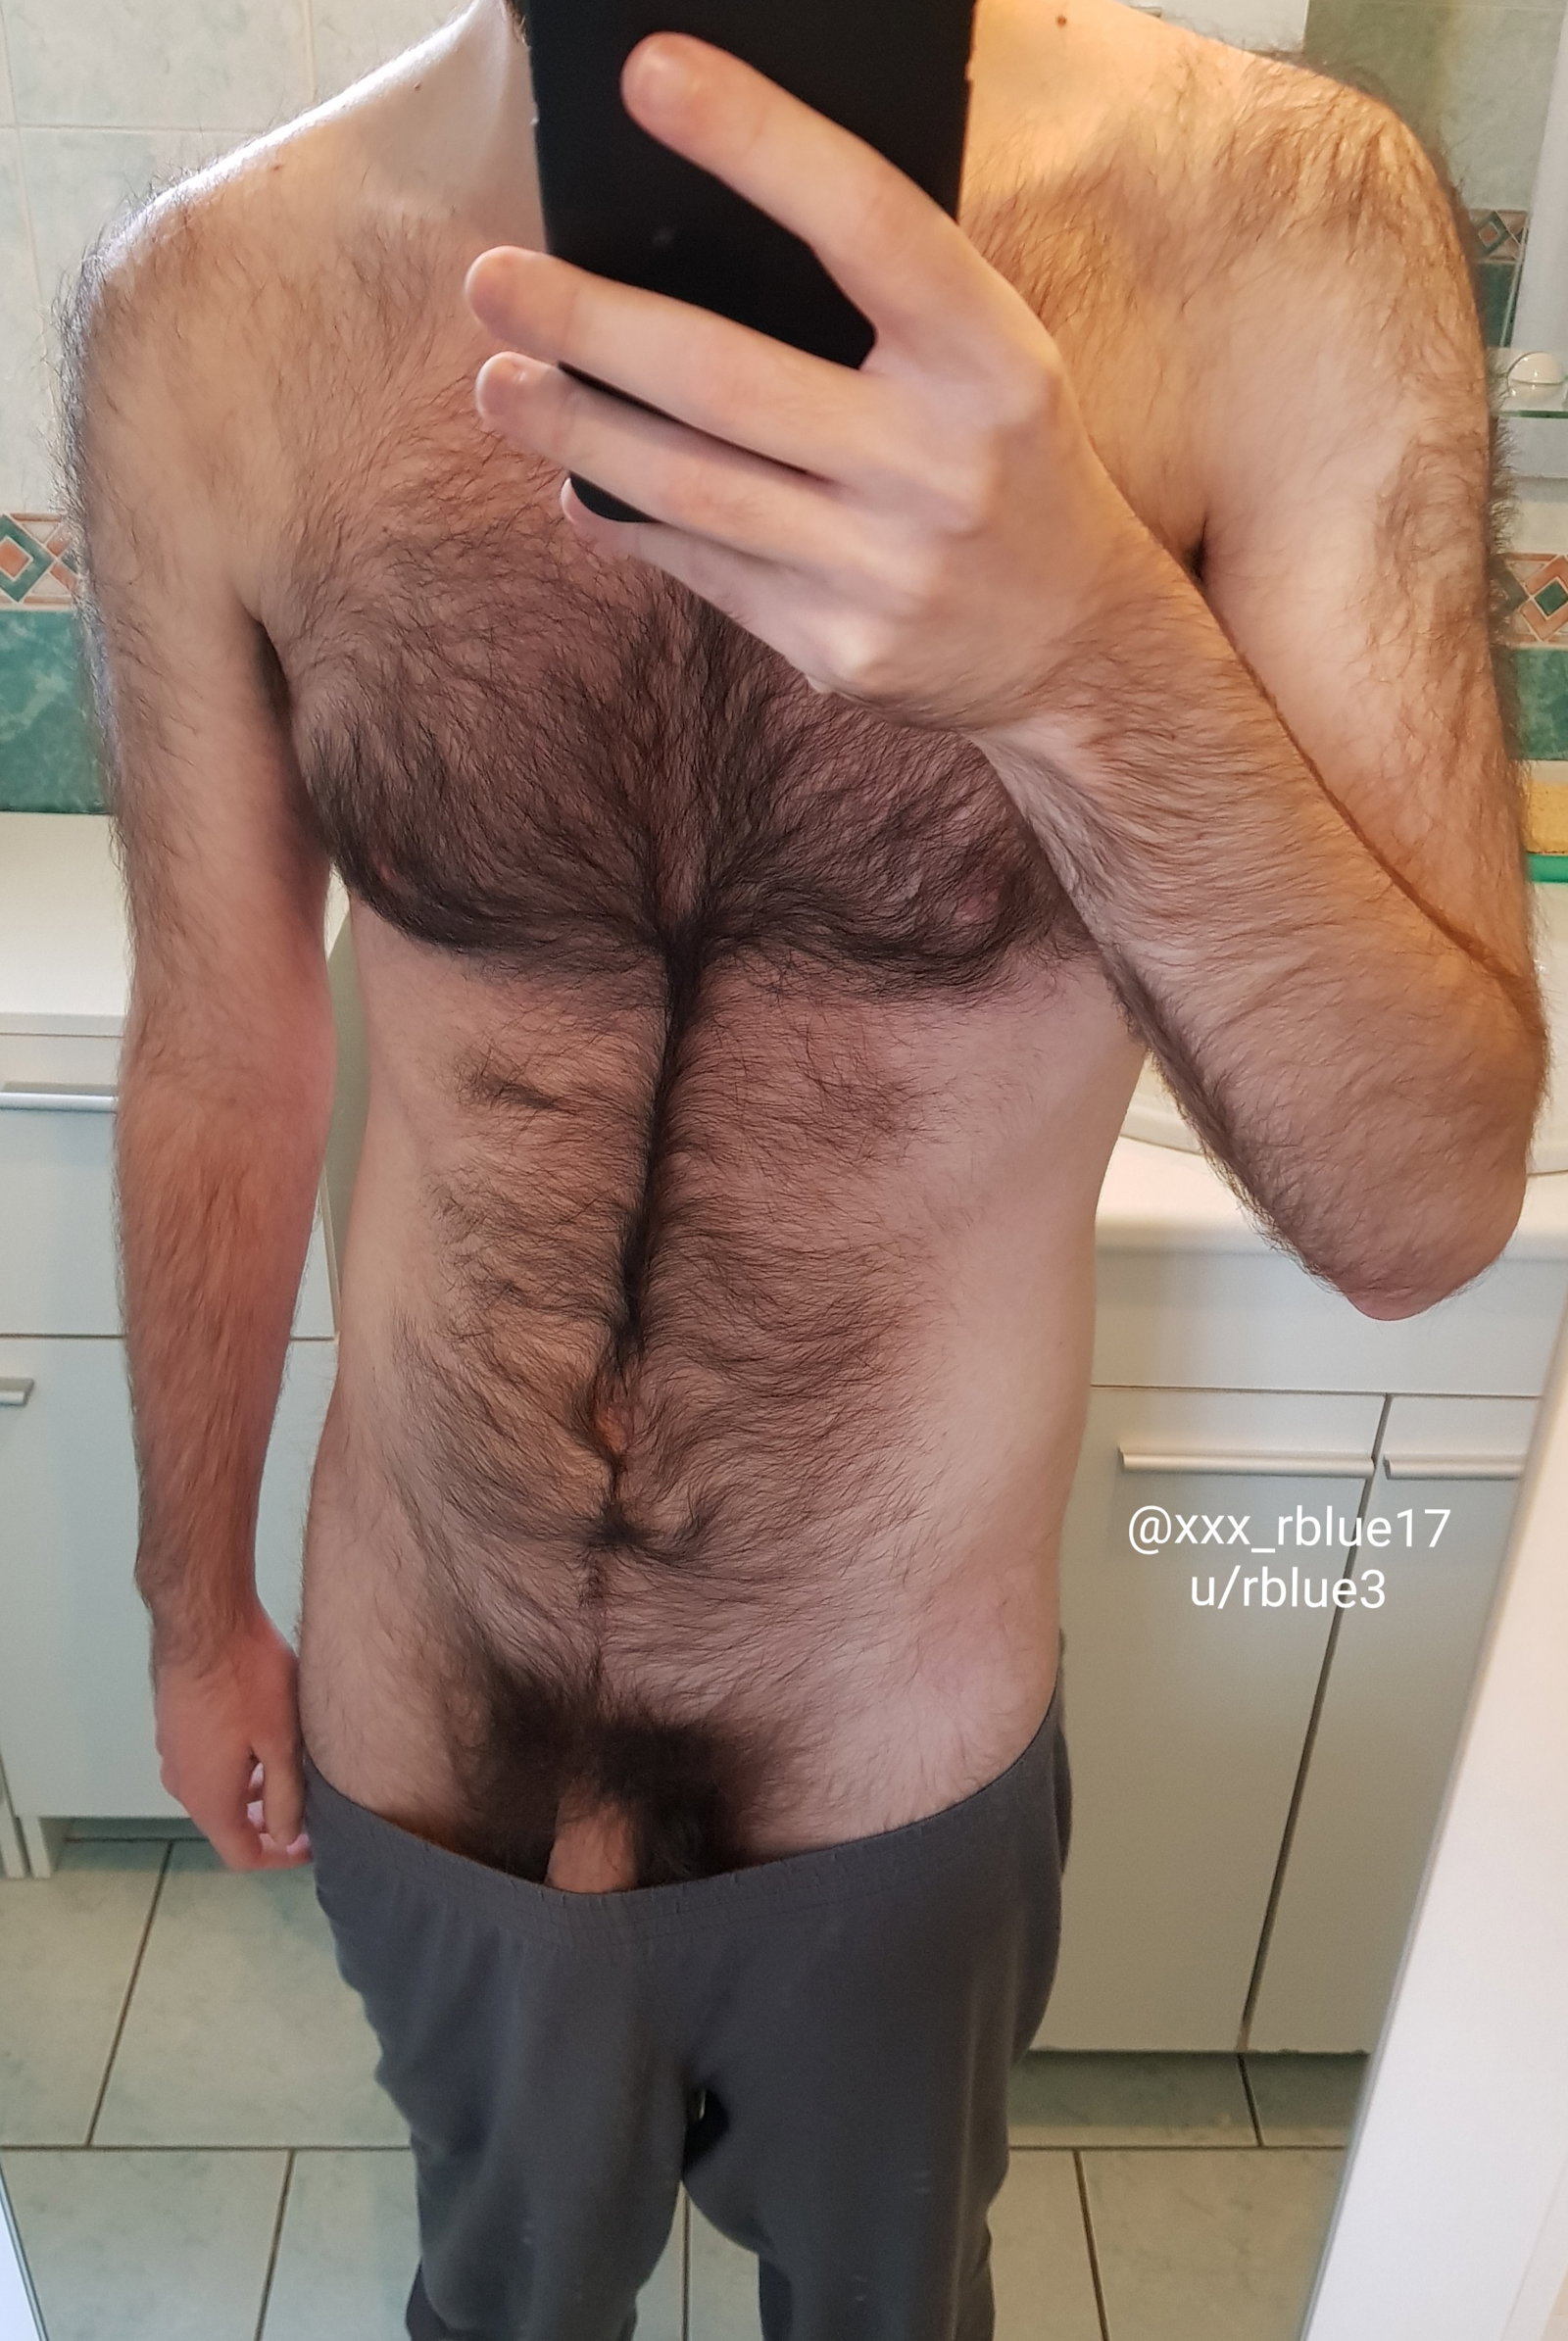 Photo by rblue with the username @rblue17,  April 13, 2020 at 4:34 PM. The post is about the topic GayExTumblr and the text says 'My pubes are coming out of their quarantine'